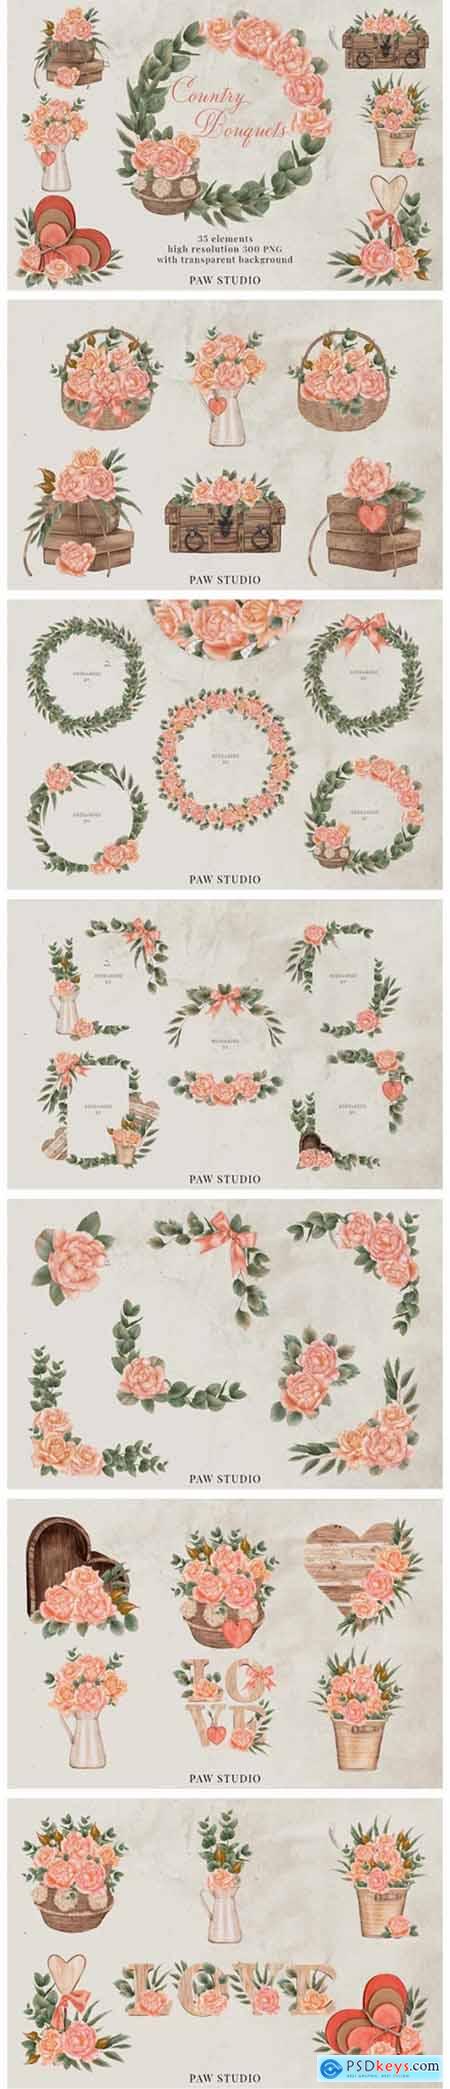 Roses Frames Bouquets Borders Wreaths 8566894